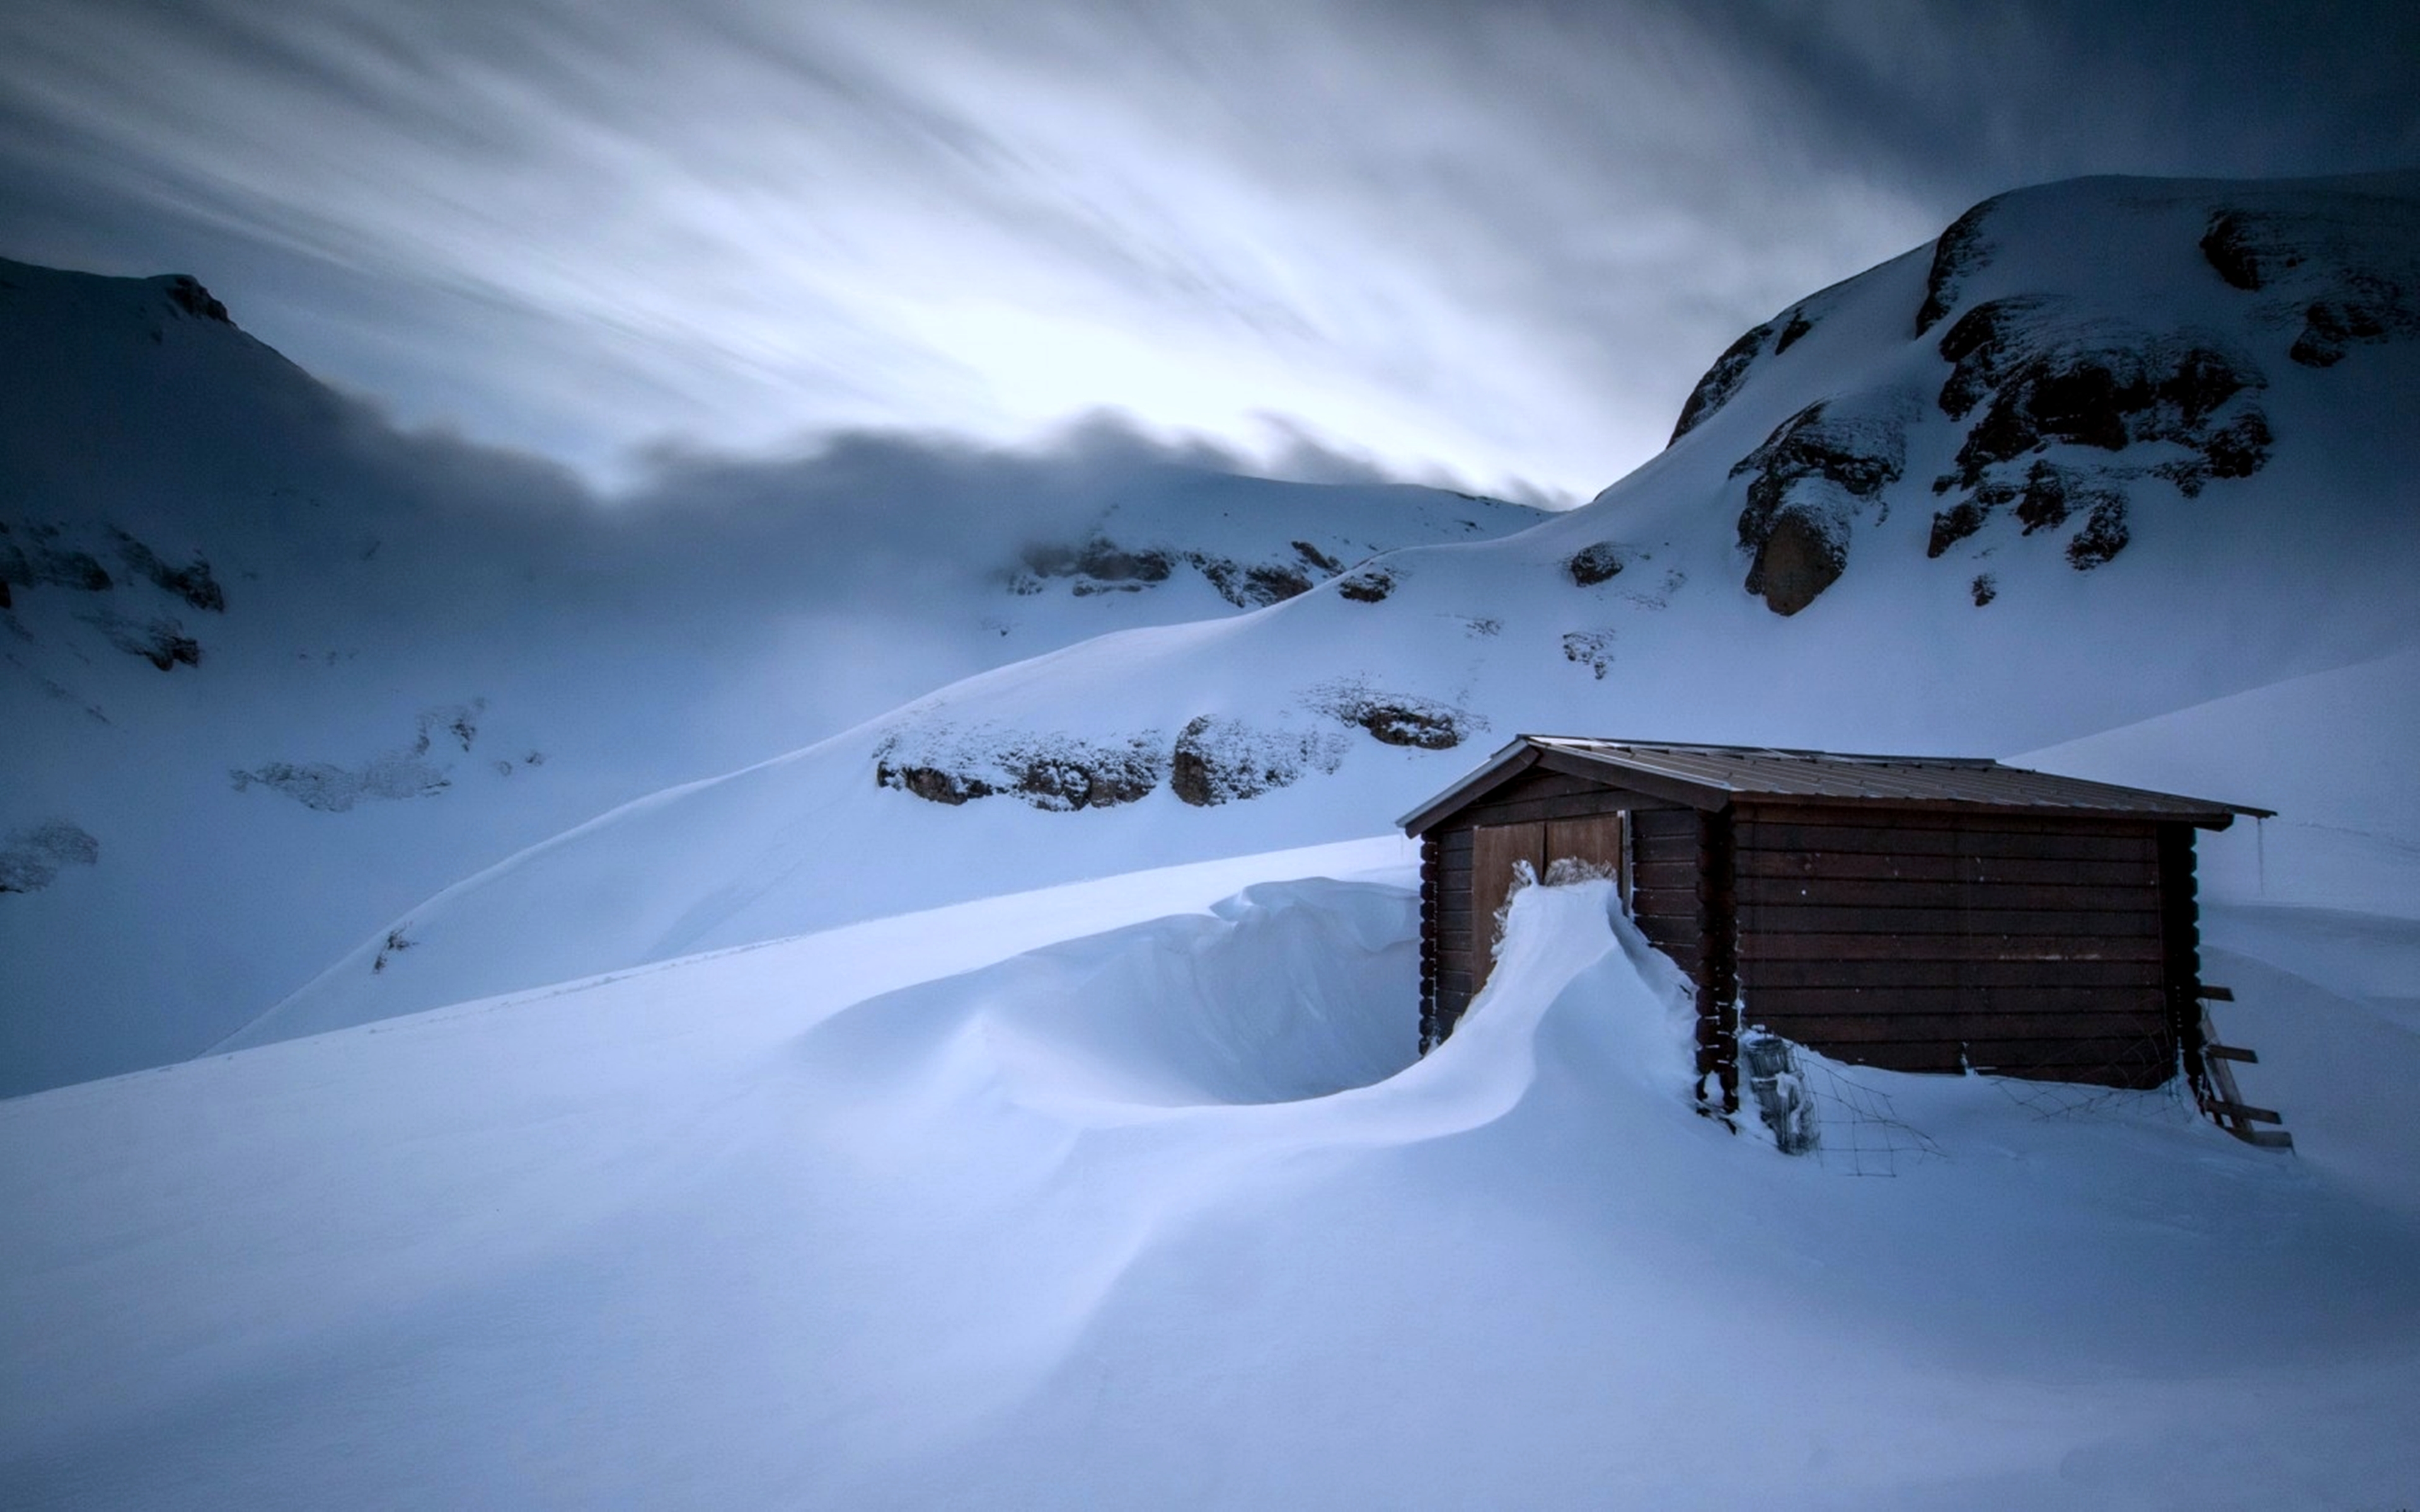 white, photography, winter, cold, house, hut, landscape, mountain, nature, snow iphone wallpaper